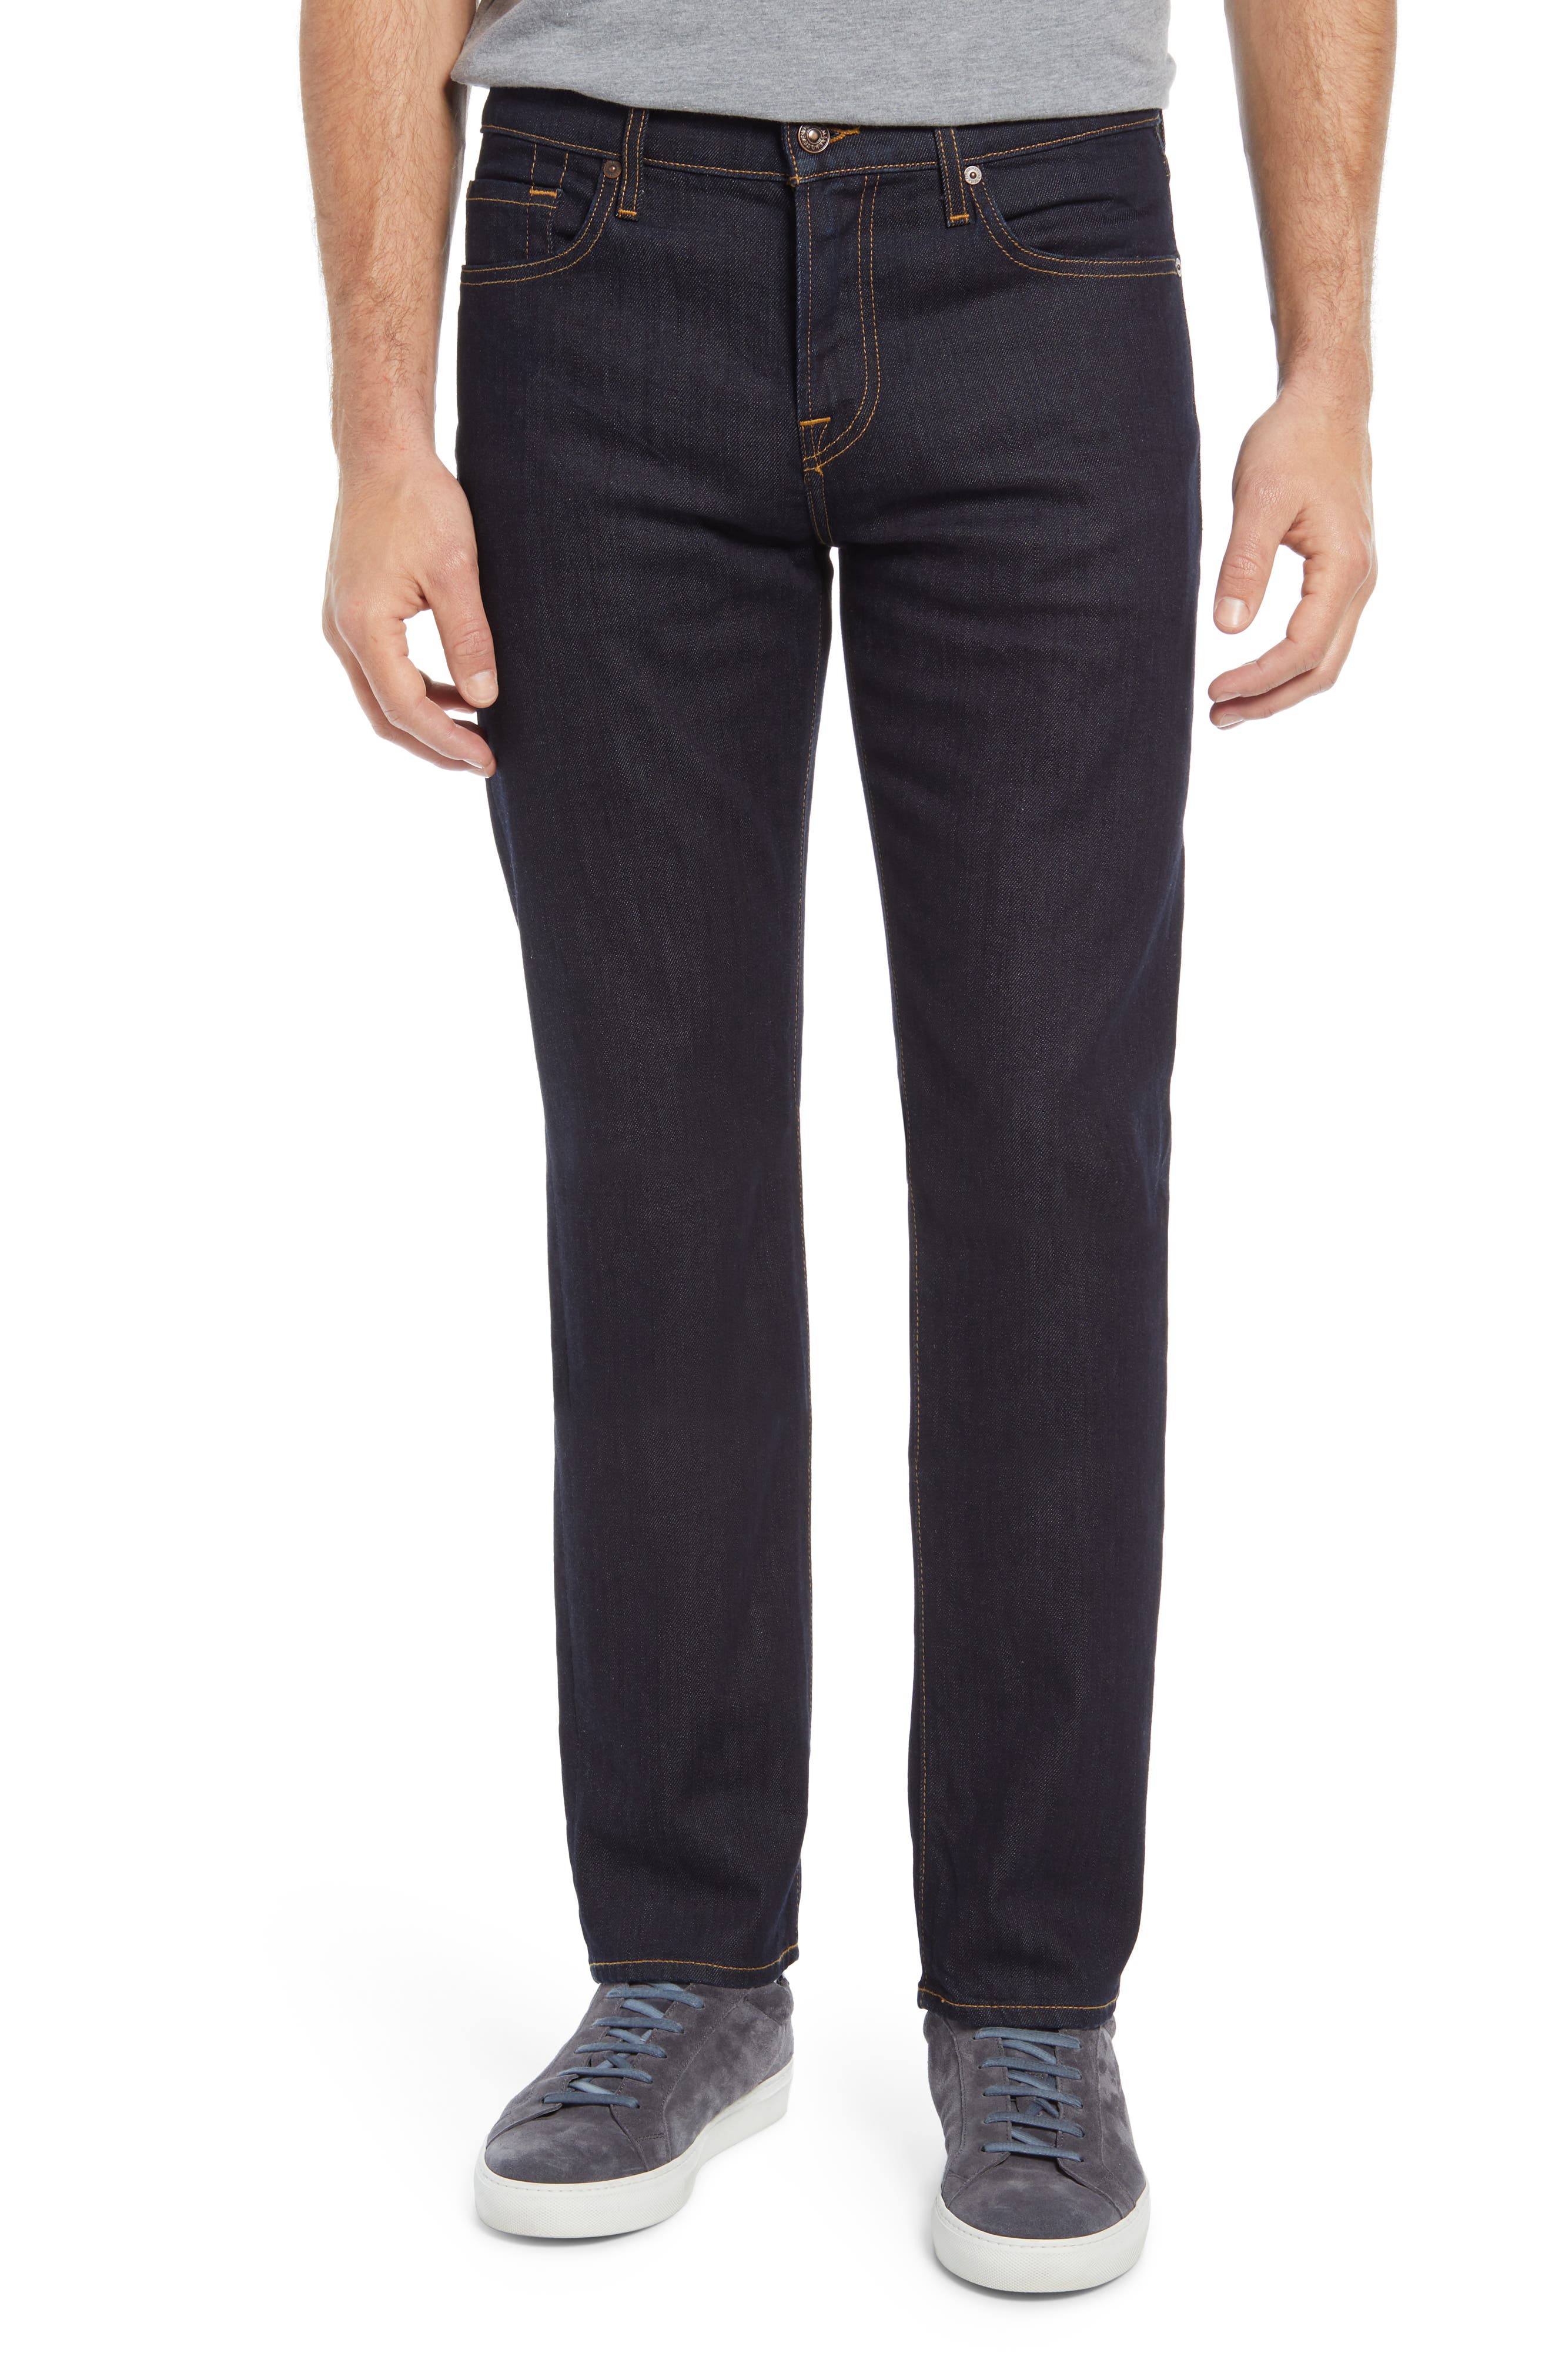 7 for all mankind usa website